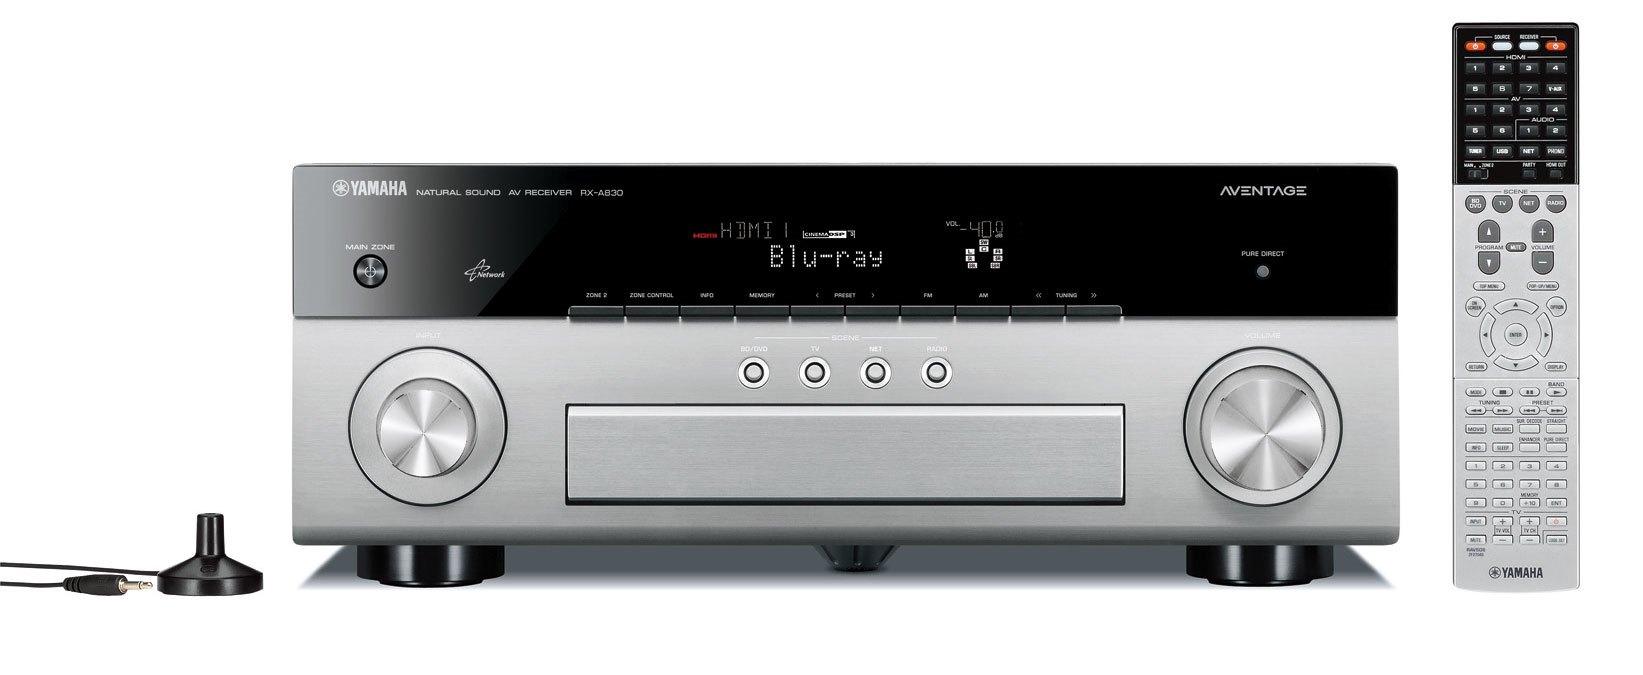 RX-A830 - Overview - AV Receivers - Audio & Visual - Products - Yamaha